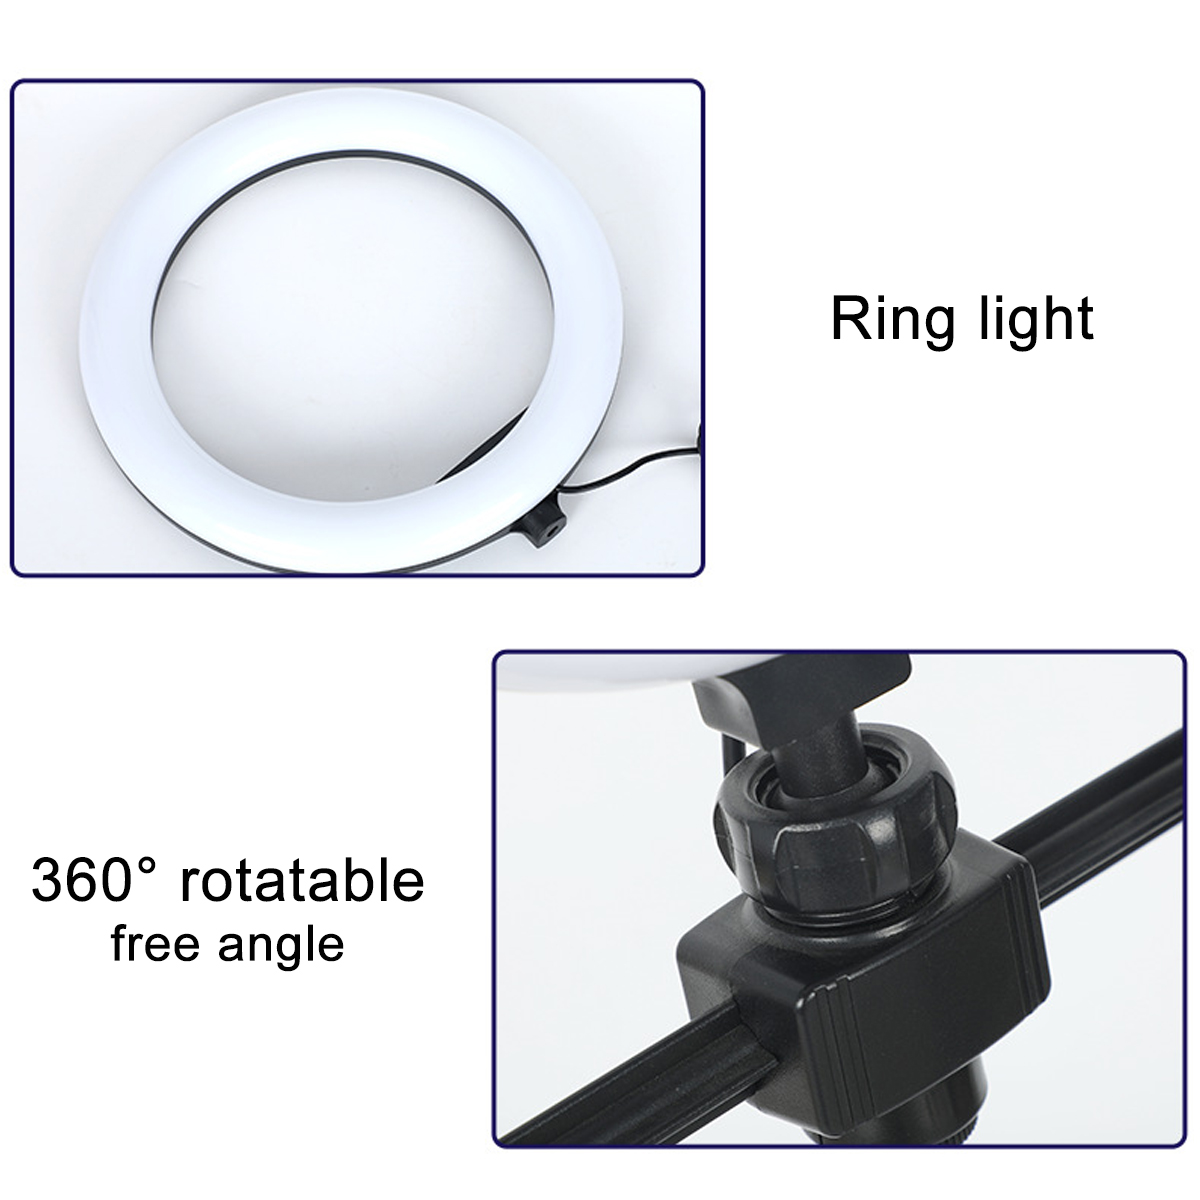 916-cm-3-Modes-of-Color-Temperature-Color-Ring-Fill-Light-with-Dual-Mobile-Phone-Holder-YouTube-Tikt-1881126-9